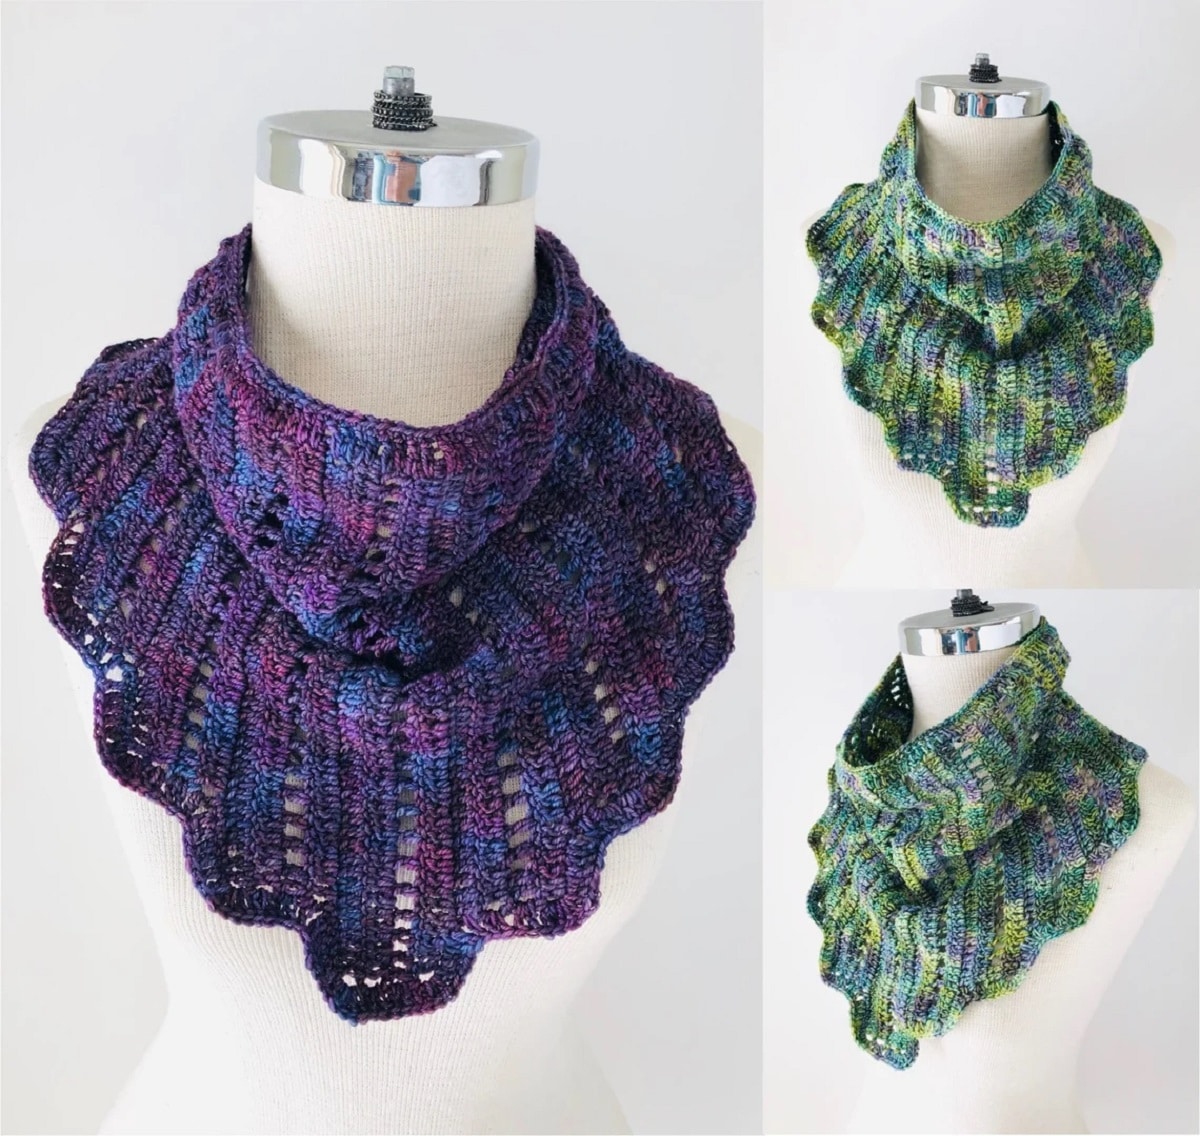 A purple and blue scalloped edge crochet infinity scarf on a mannequin next to the same style scarf in green and blue.